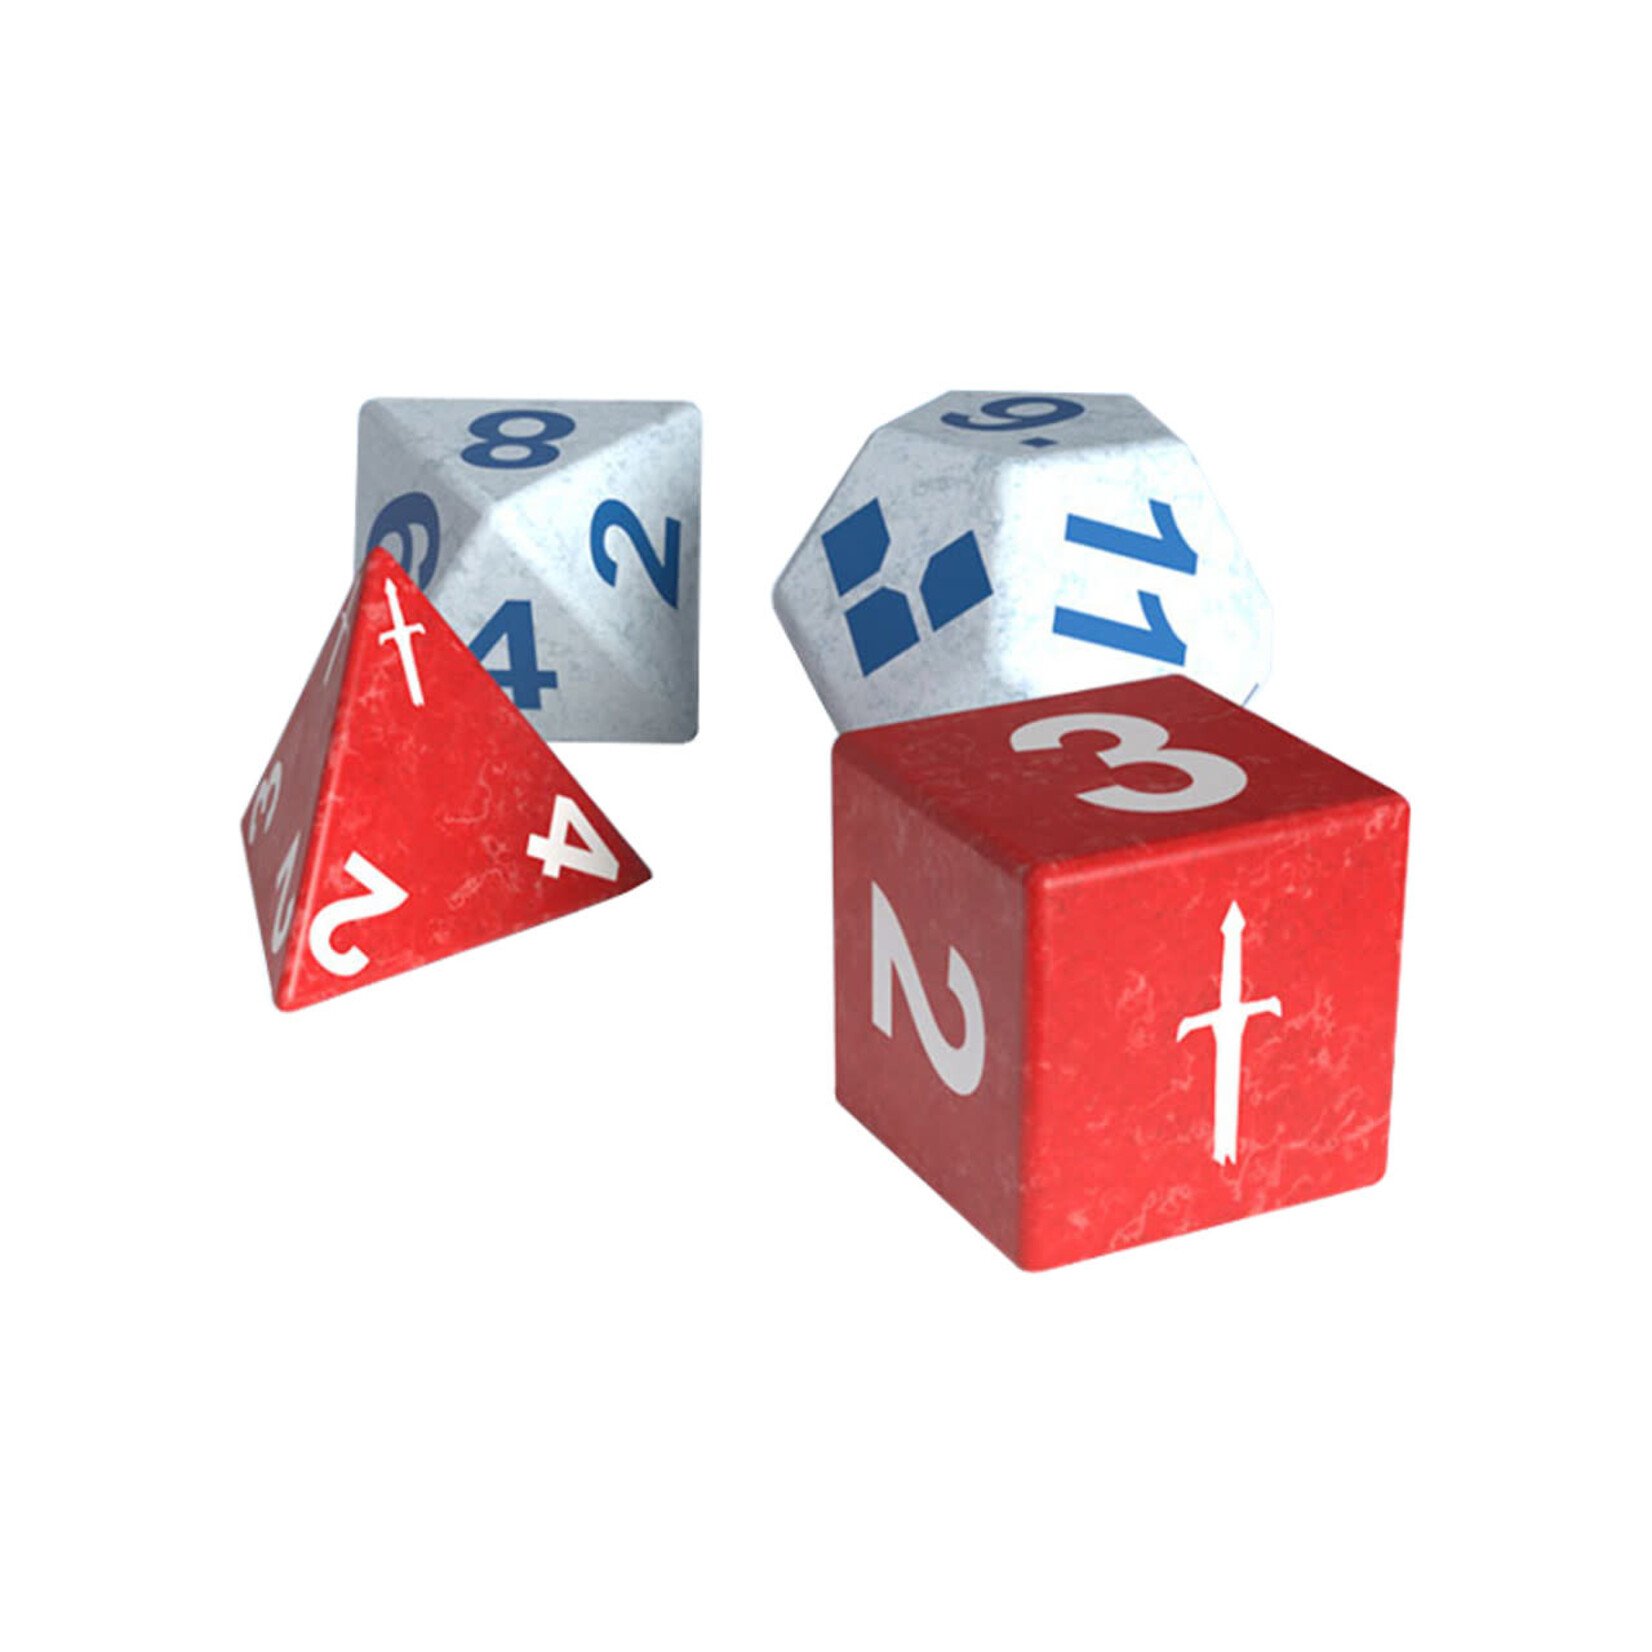 Ares Games Knights of the Round: Academy - 24 Custom Dice Set